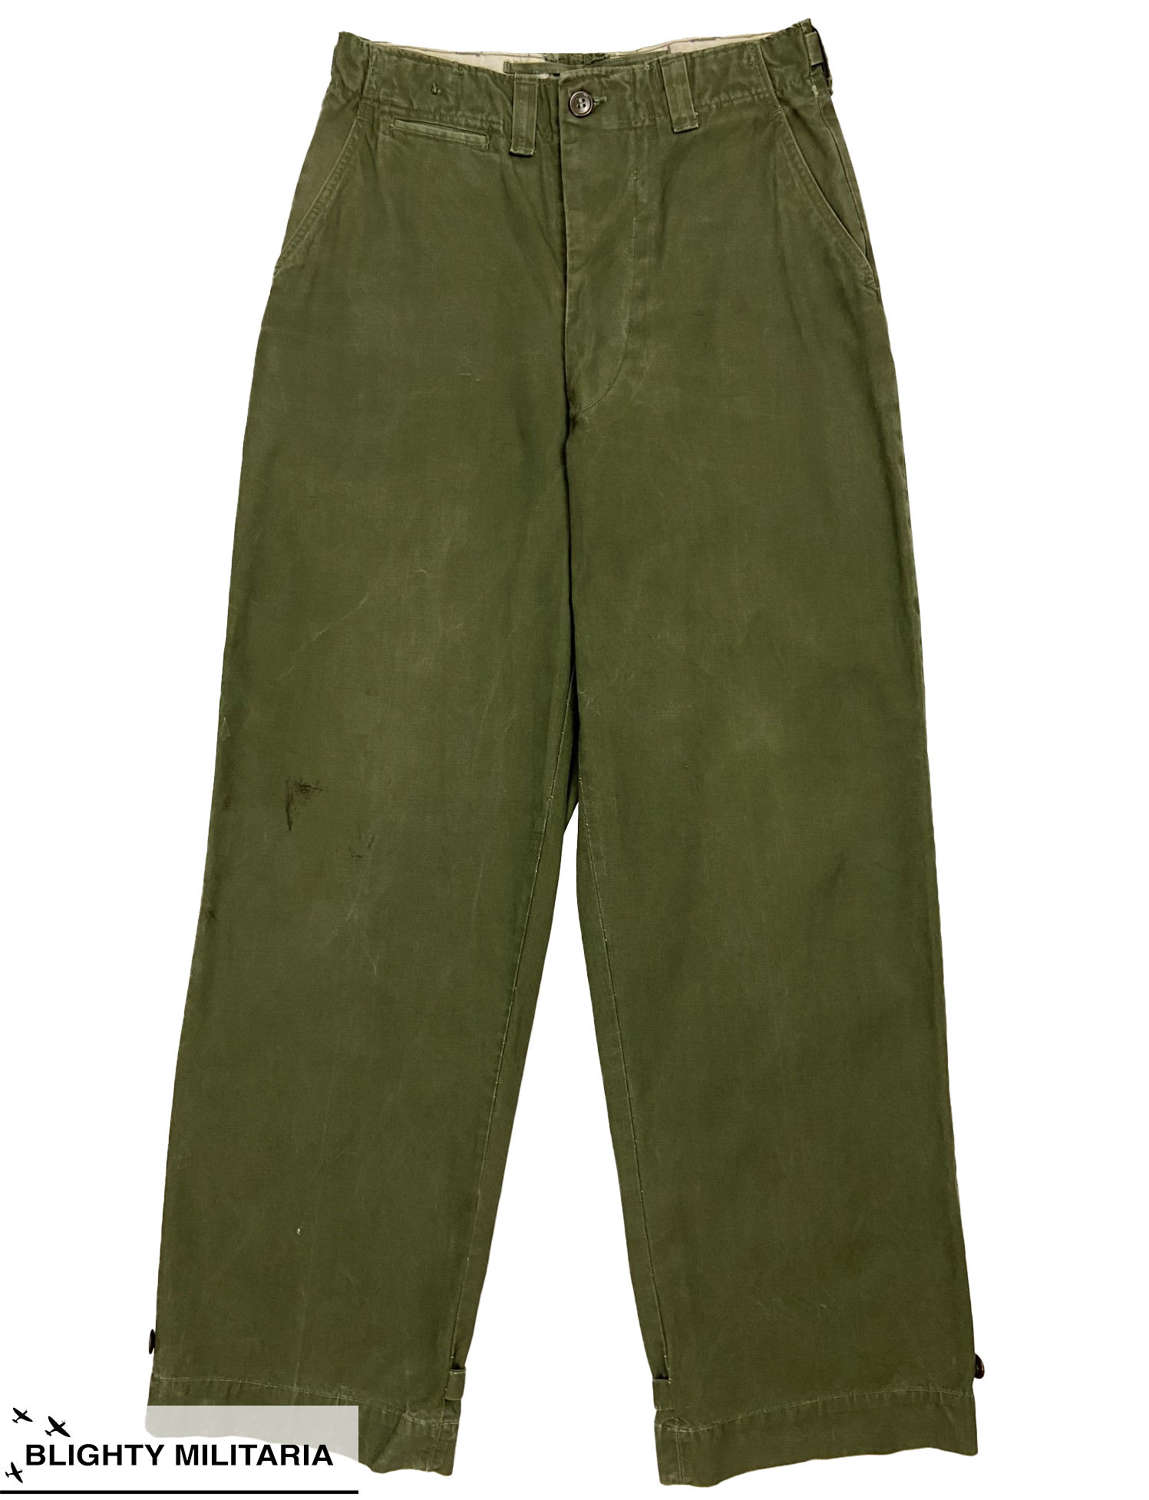 Original 1951 Dated US Army M43 Combat Trousers - Size 30x32